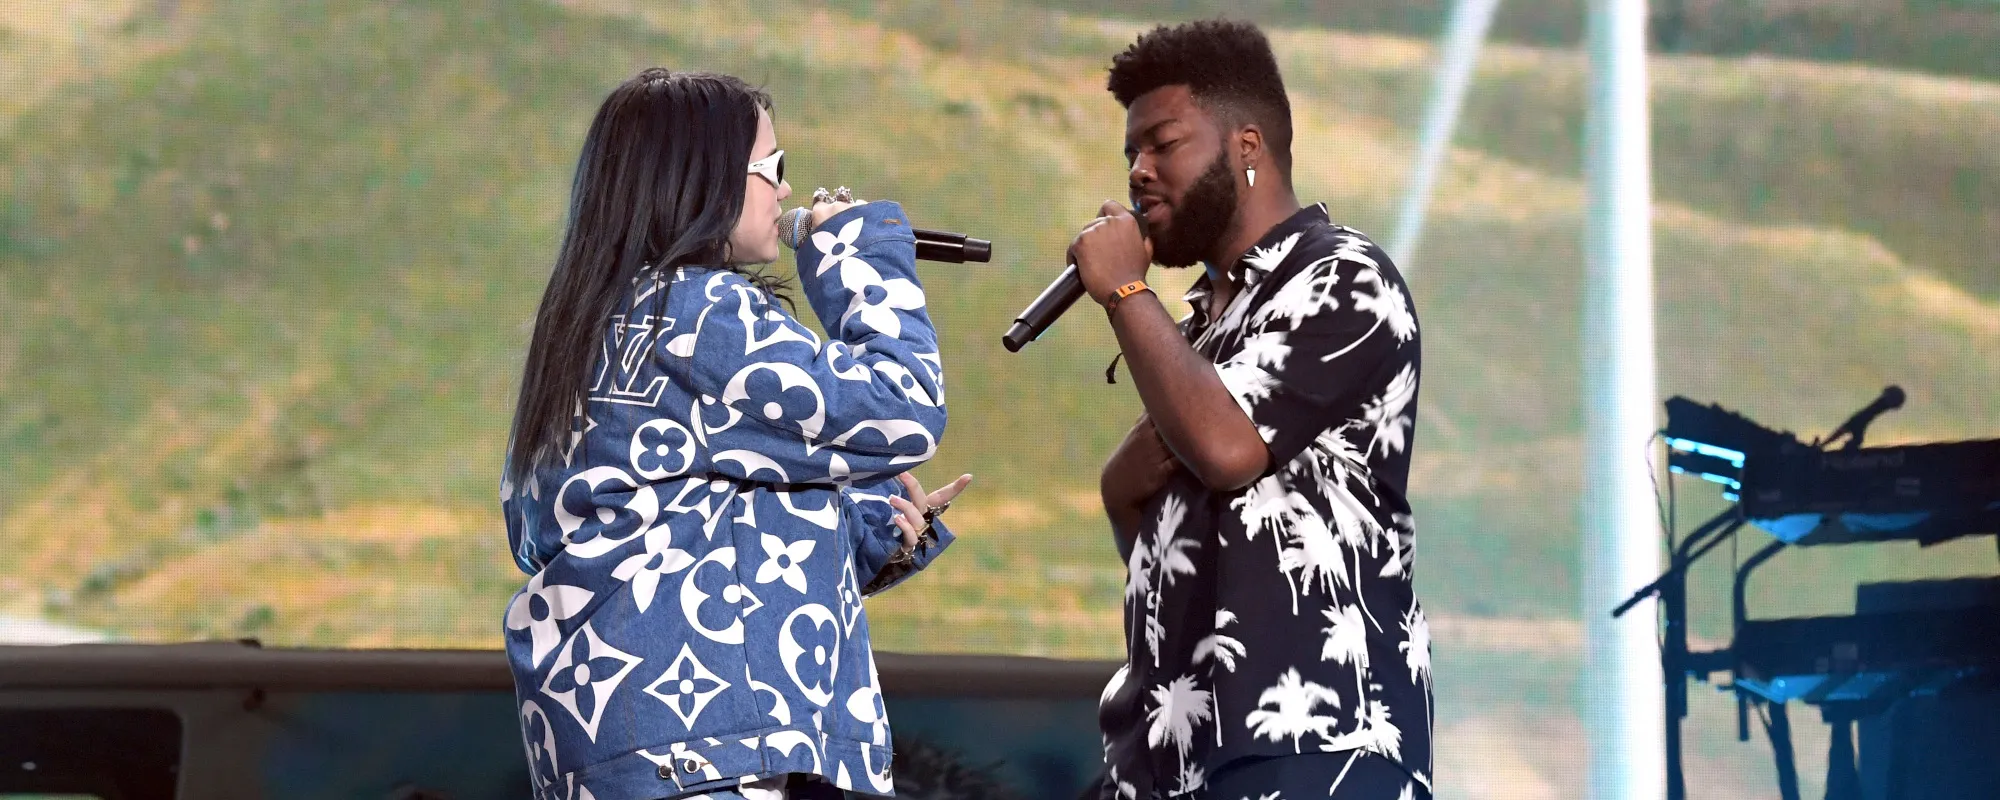 The Haunting Meaning Behind “Lovely” by Billie Eilish (with Khalid)